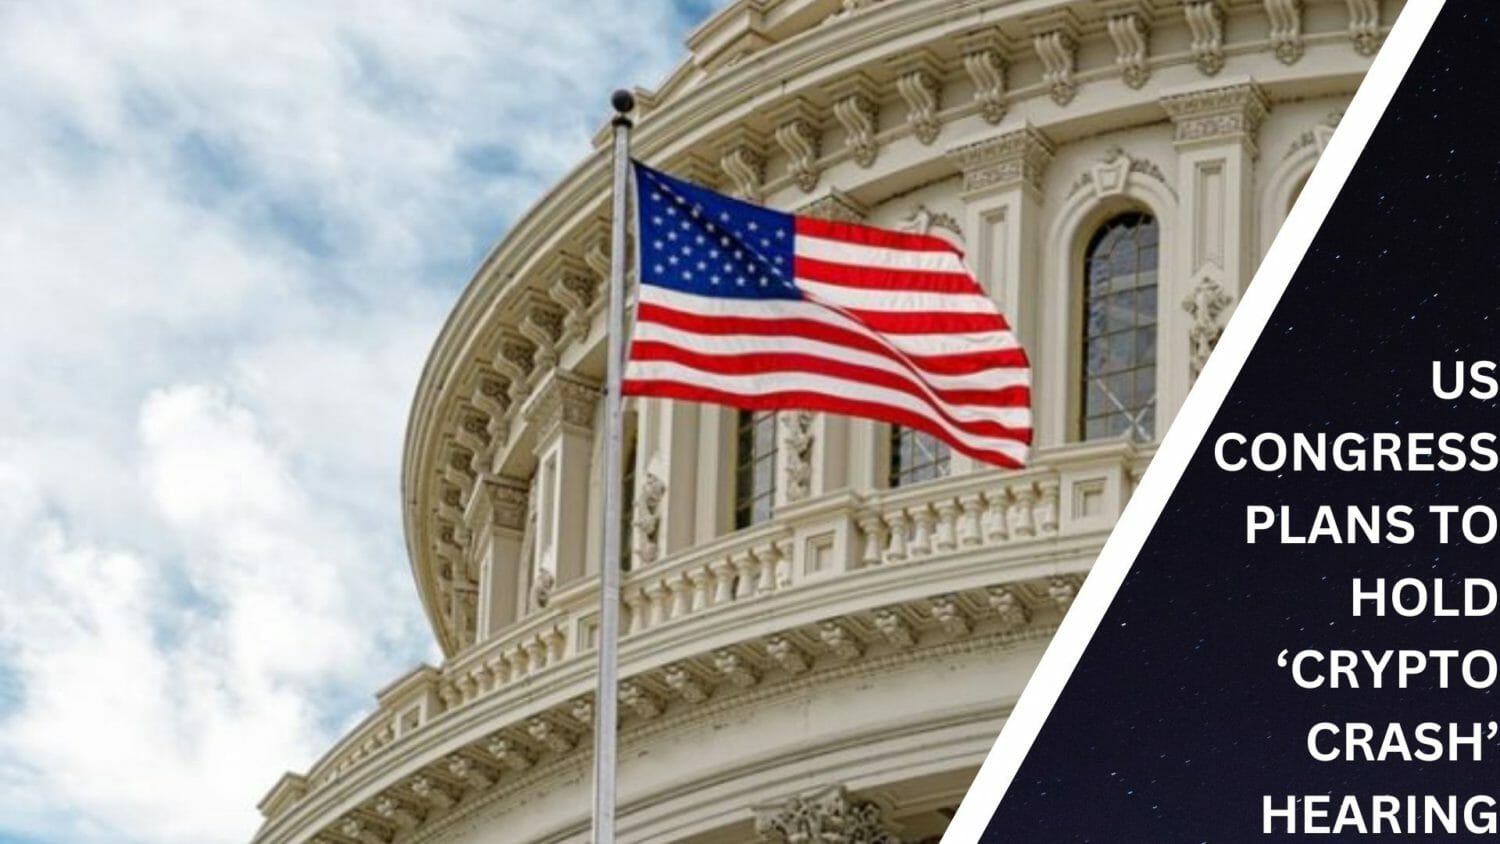 Us Congress Plans To Hold ‘Crypto Crash’ Hearing